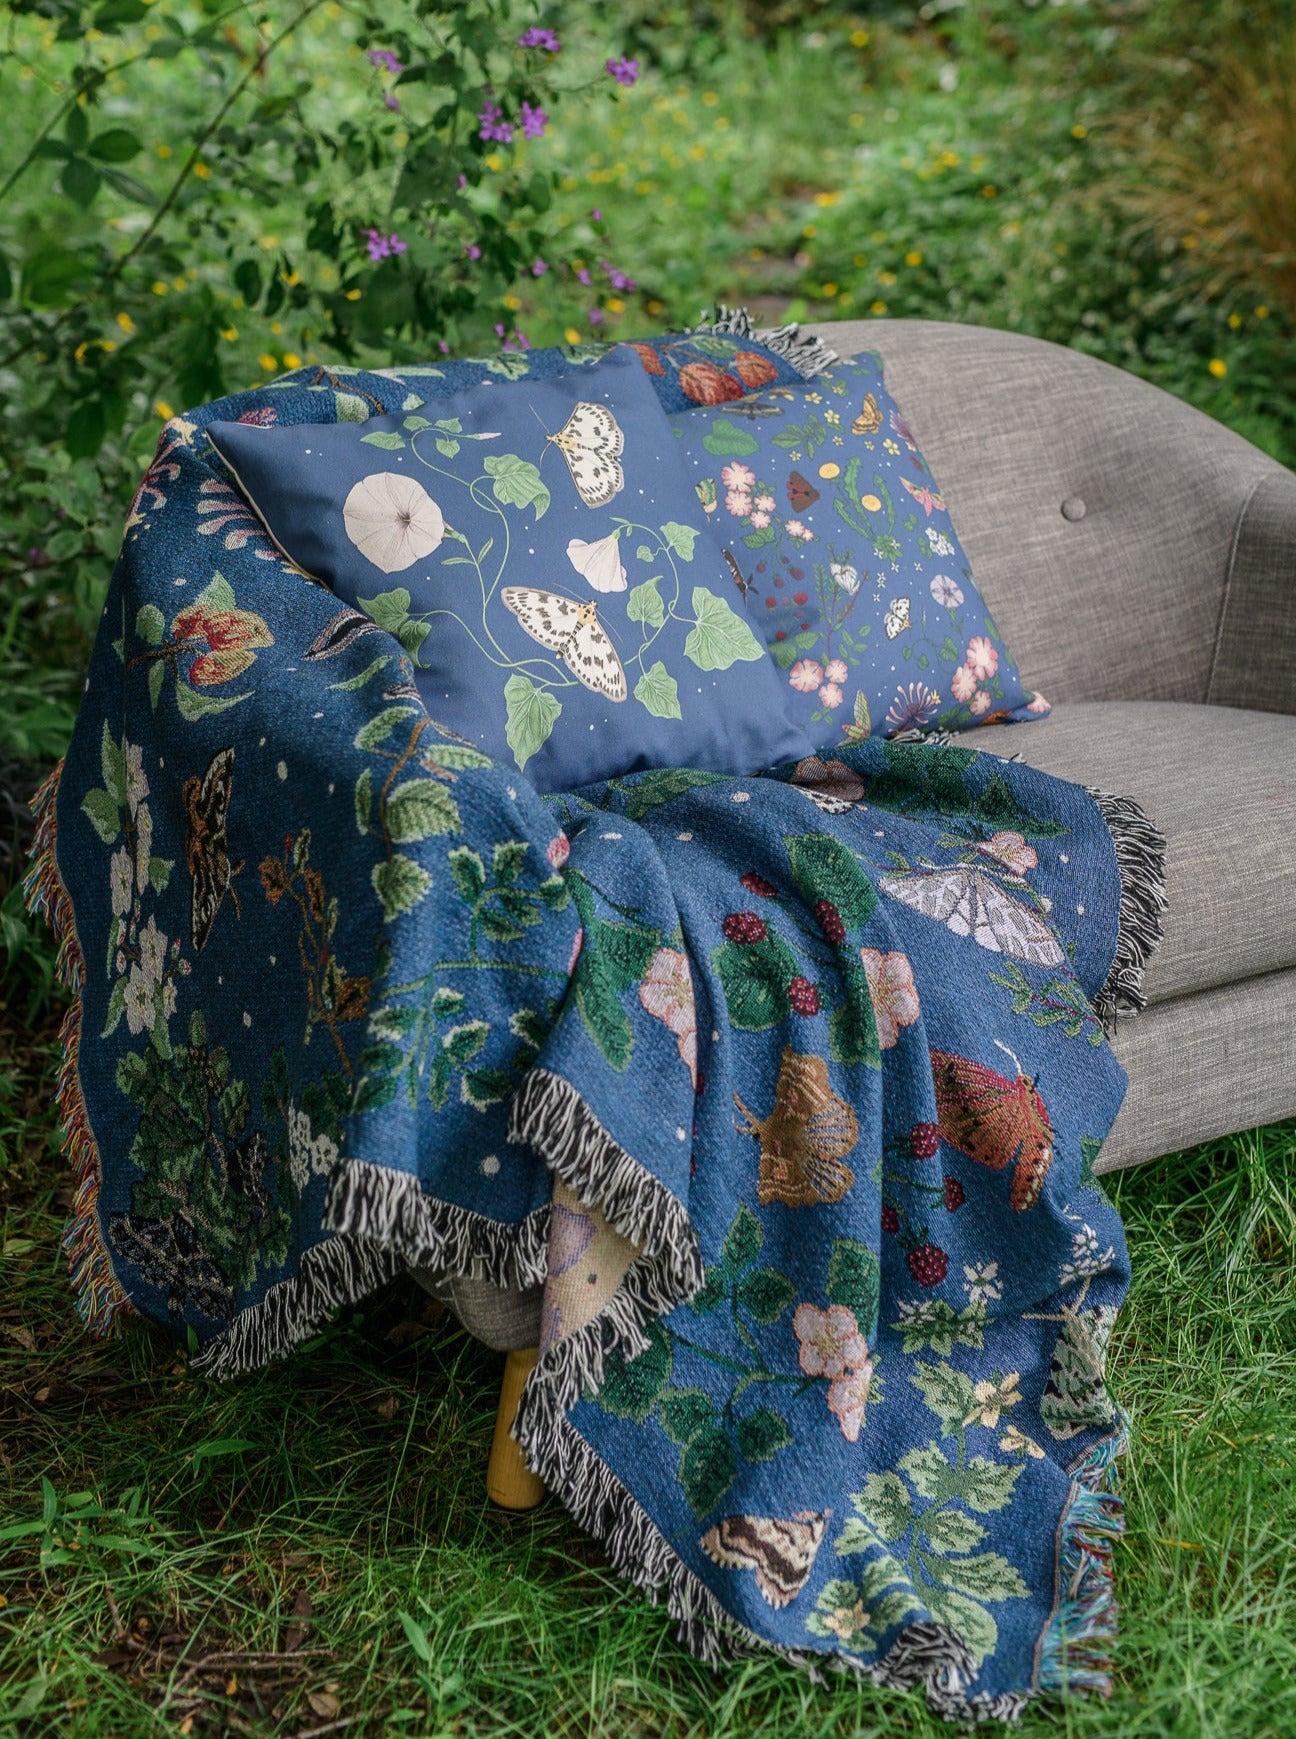 deep blue woven blanket with intricate moth and flower design being thrown across a grey sofa in a wild garden